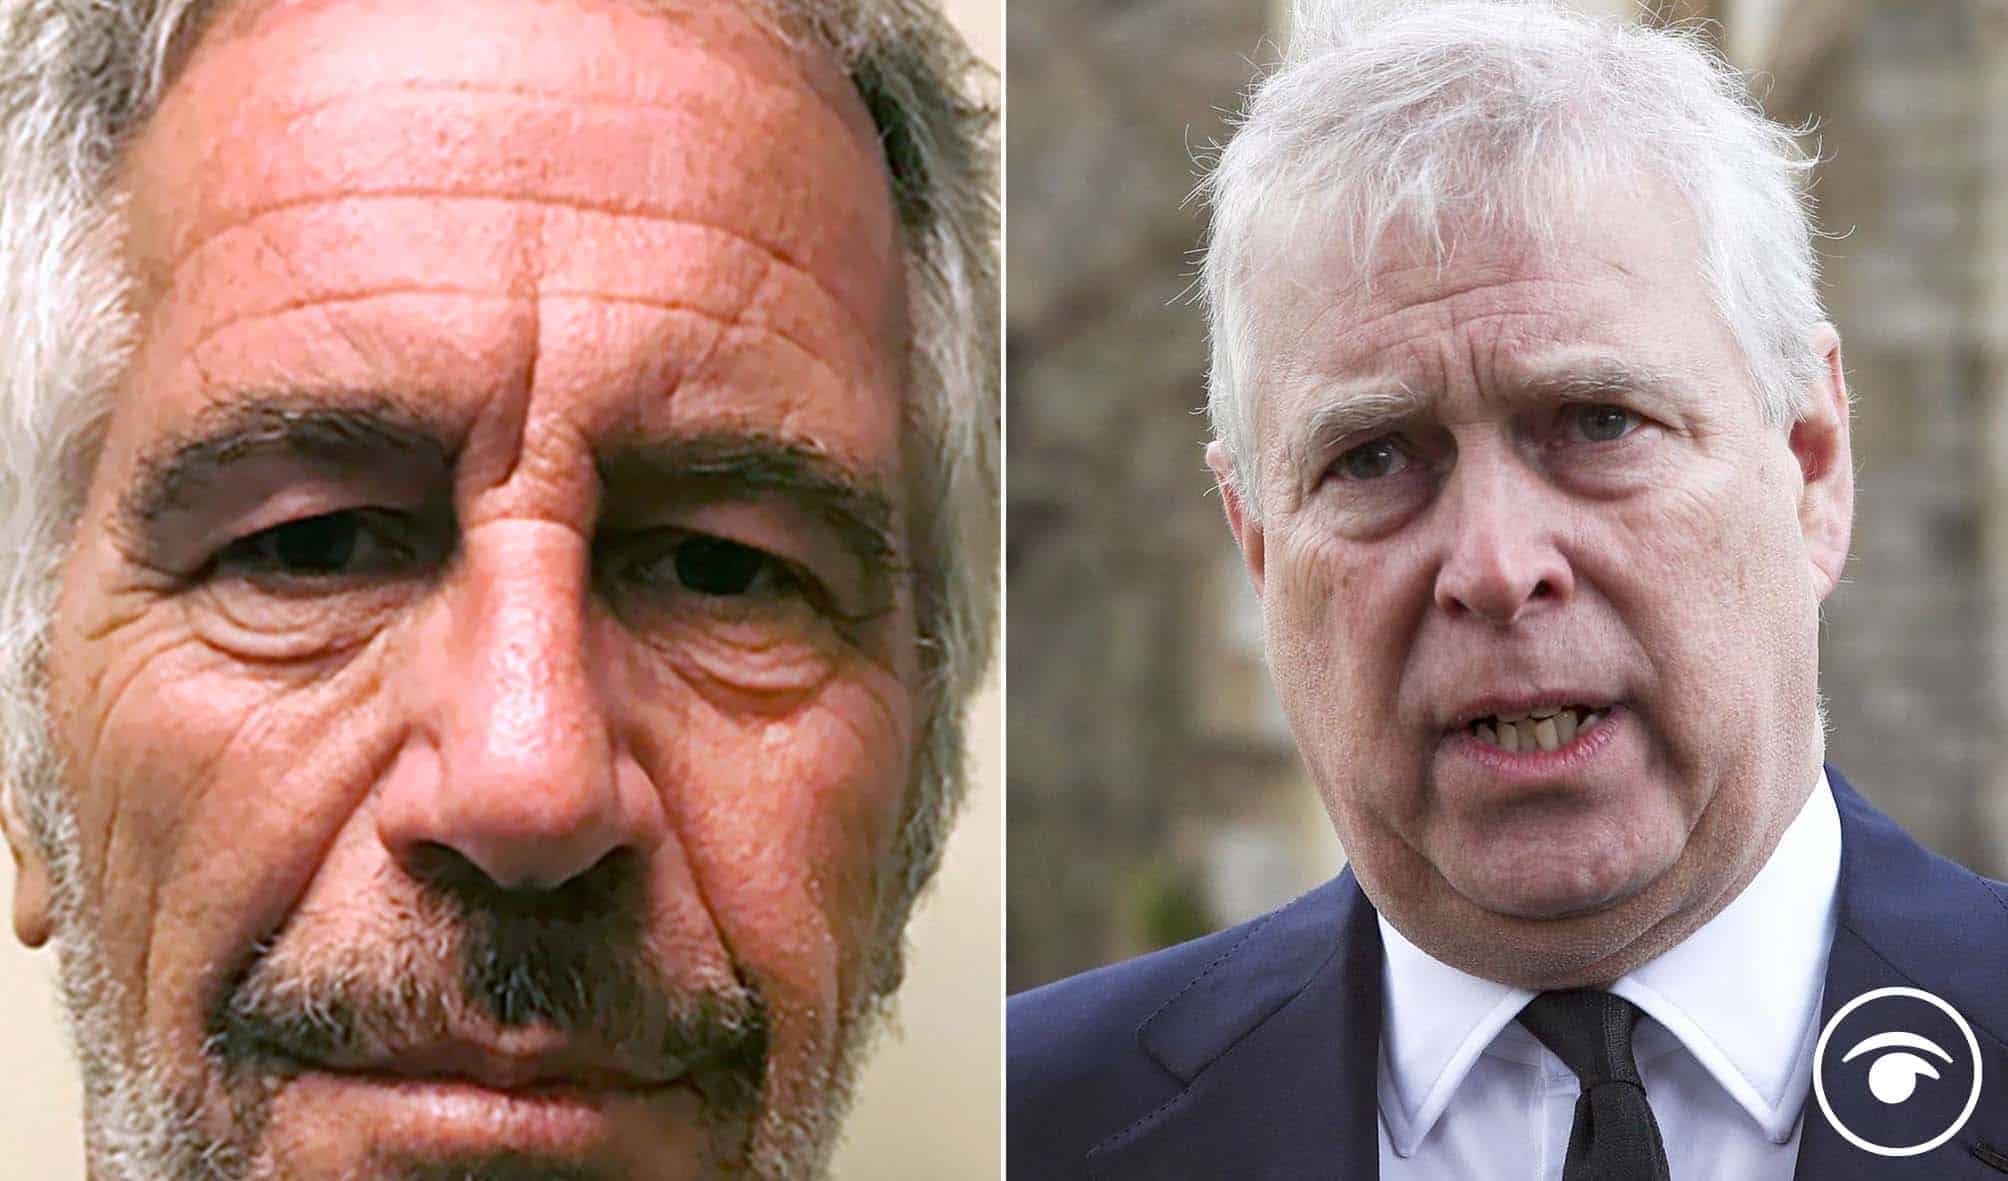 Andrew accuser’s settlement with Epstein revealed…but will it stop case against him?